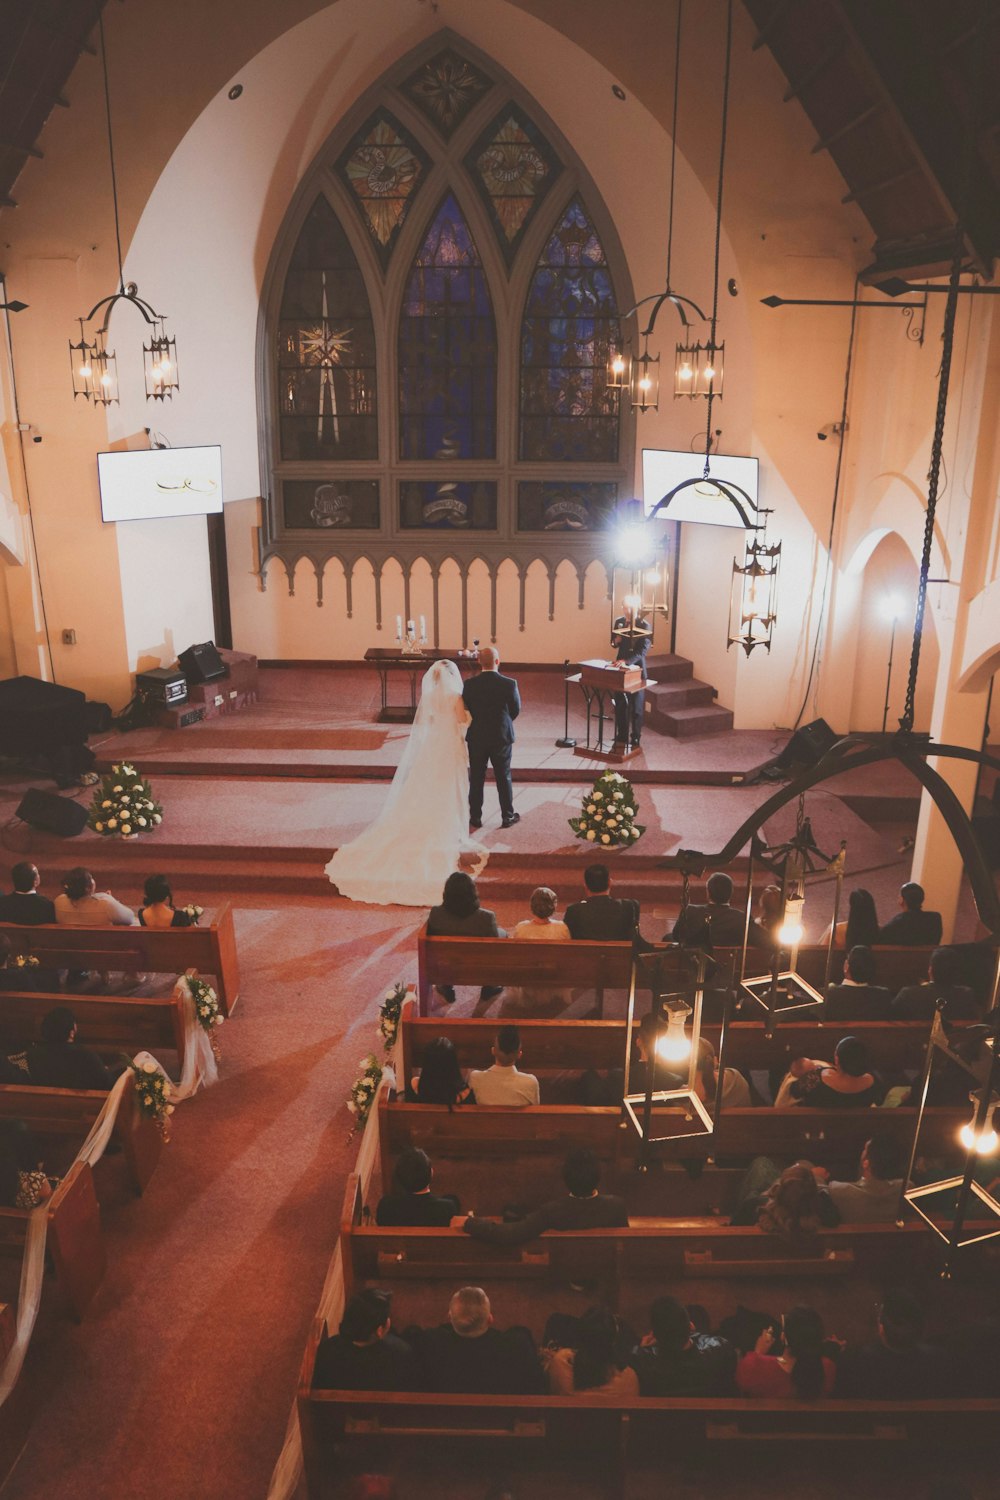 man and woman standing on altar in front of people sitting on pews inside church